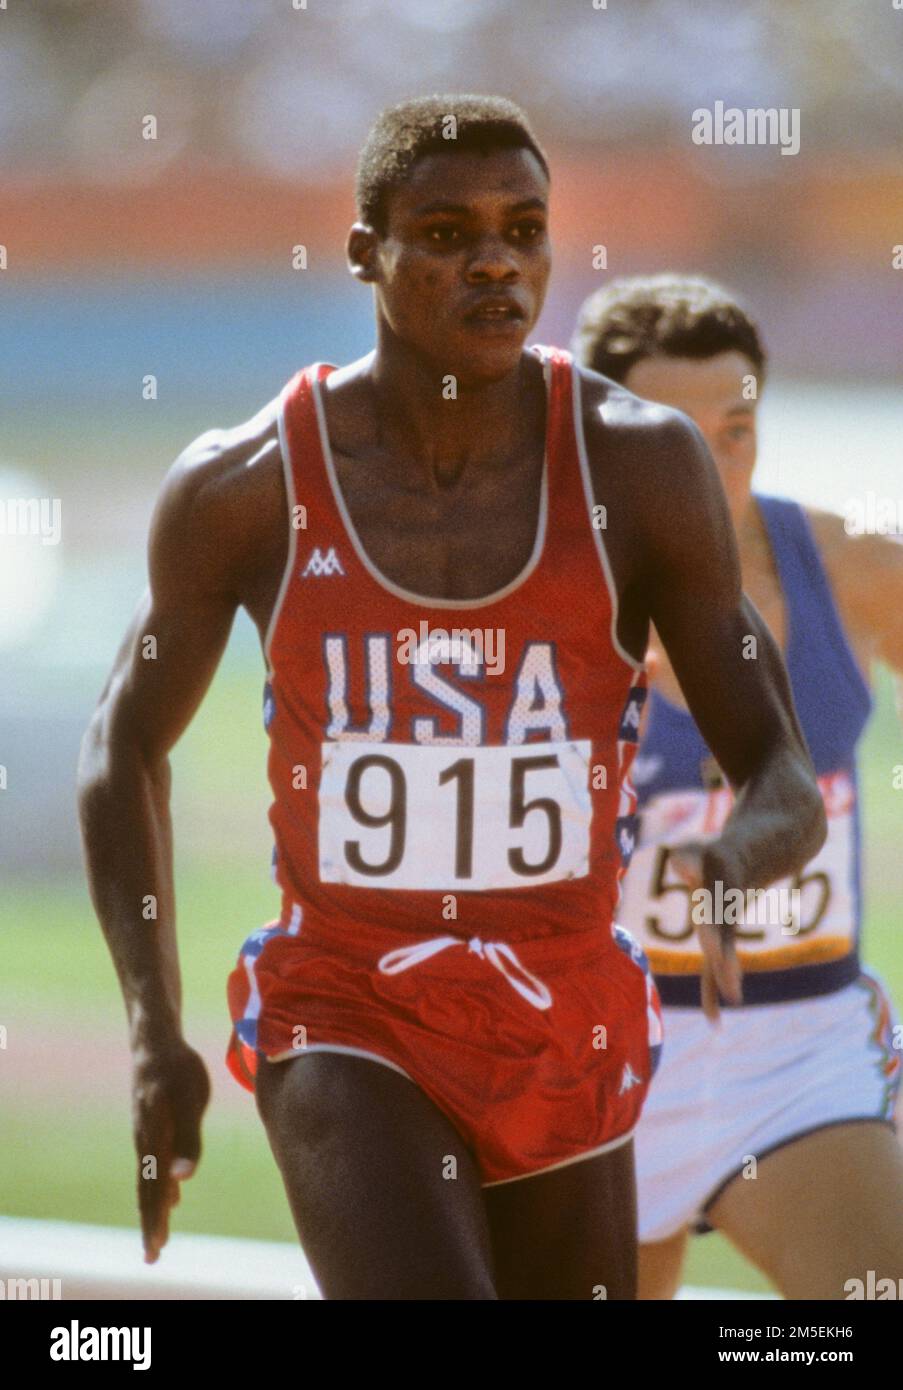 OLYMPIC SUMMER GAMES LOS ANGELES 1984 Carl Lewis USA win 100m sprint in  Los Angeles 1984 Stock Photo